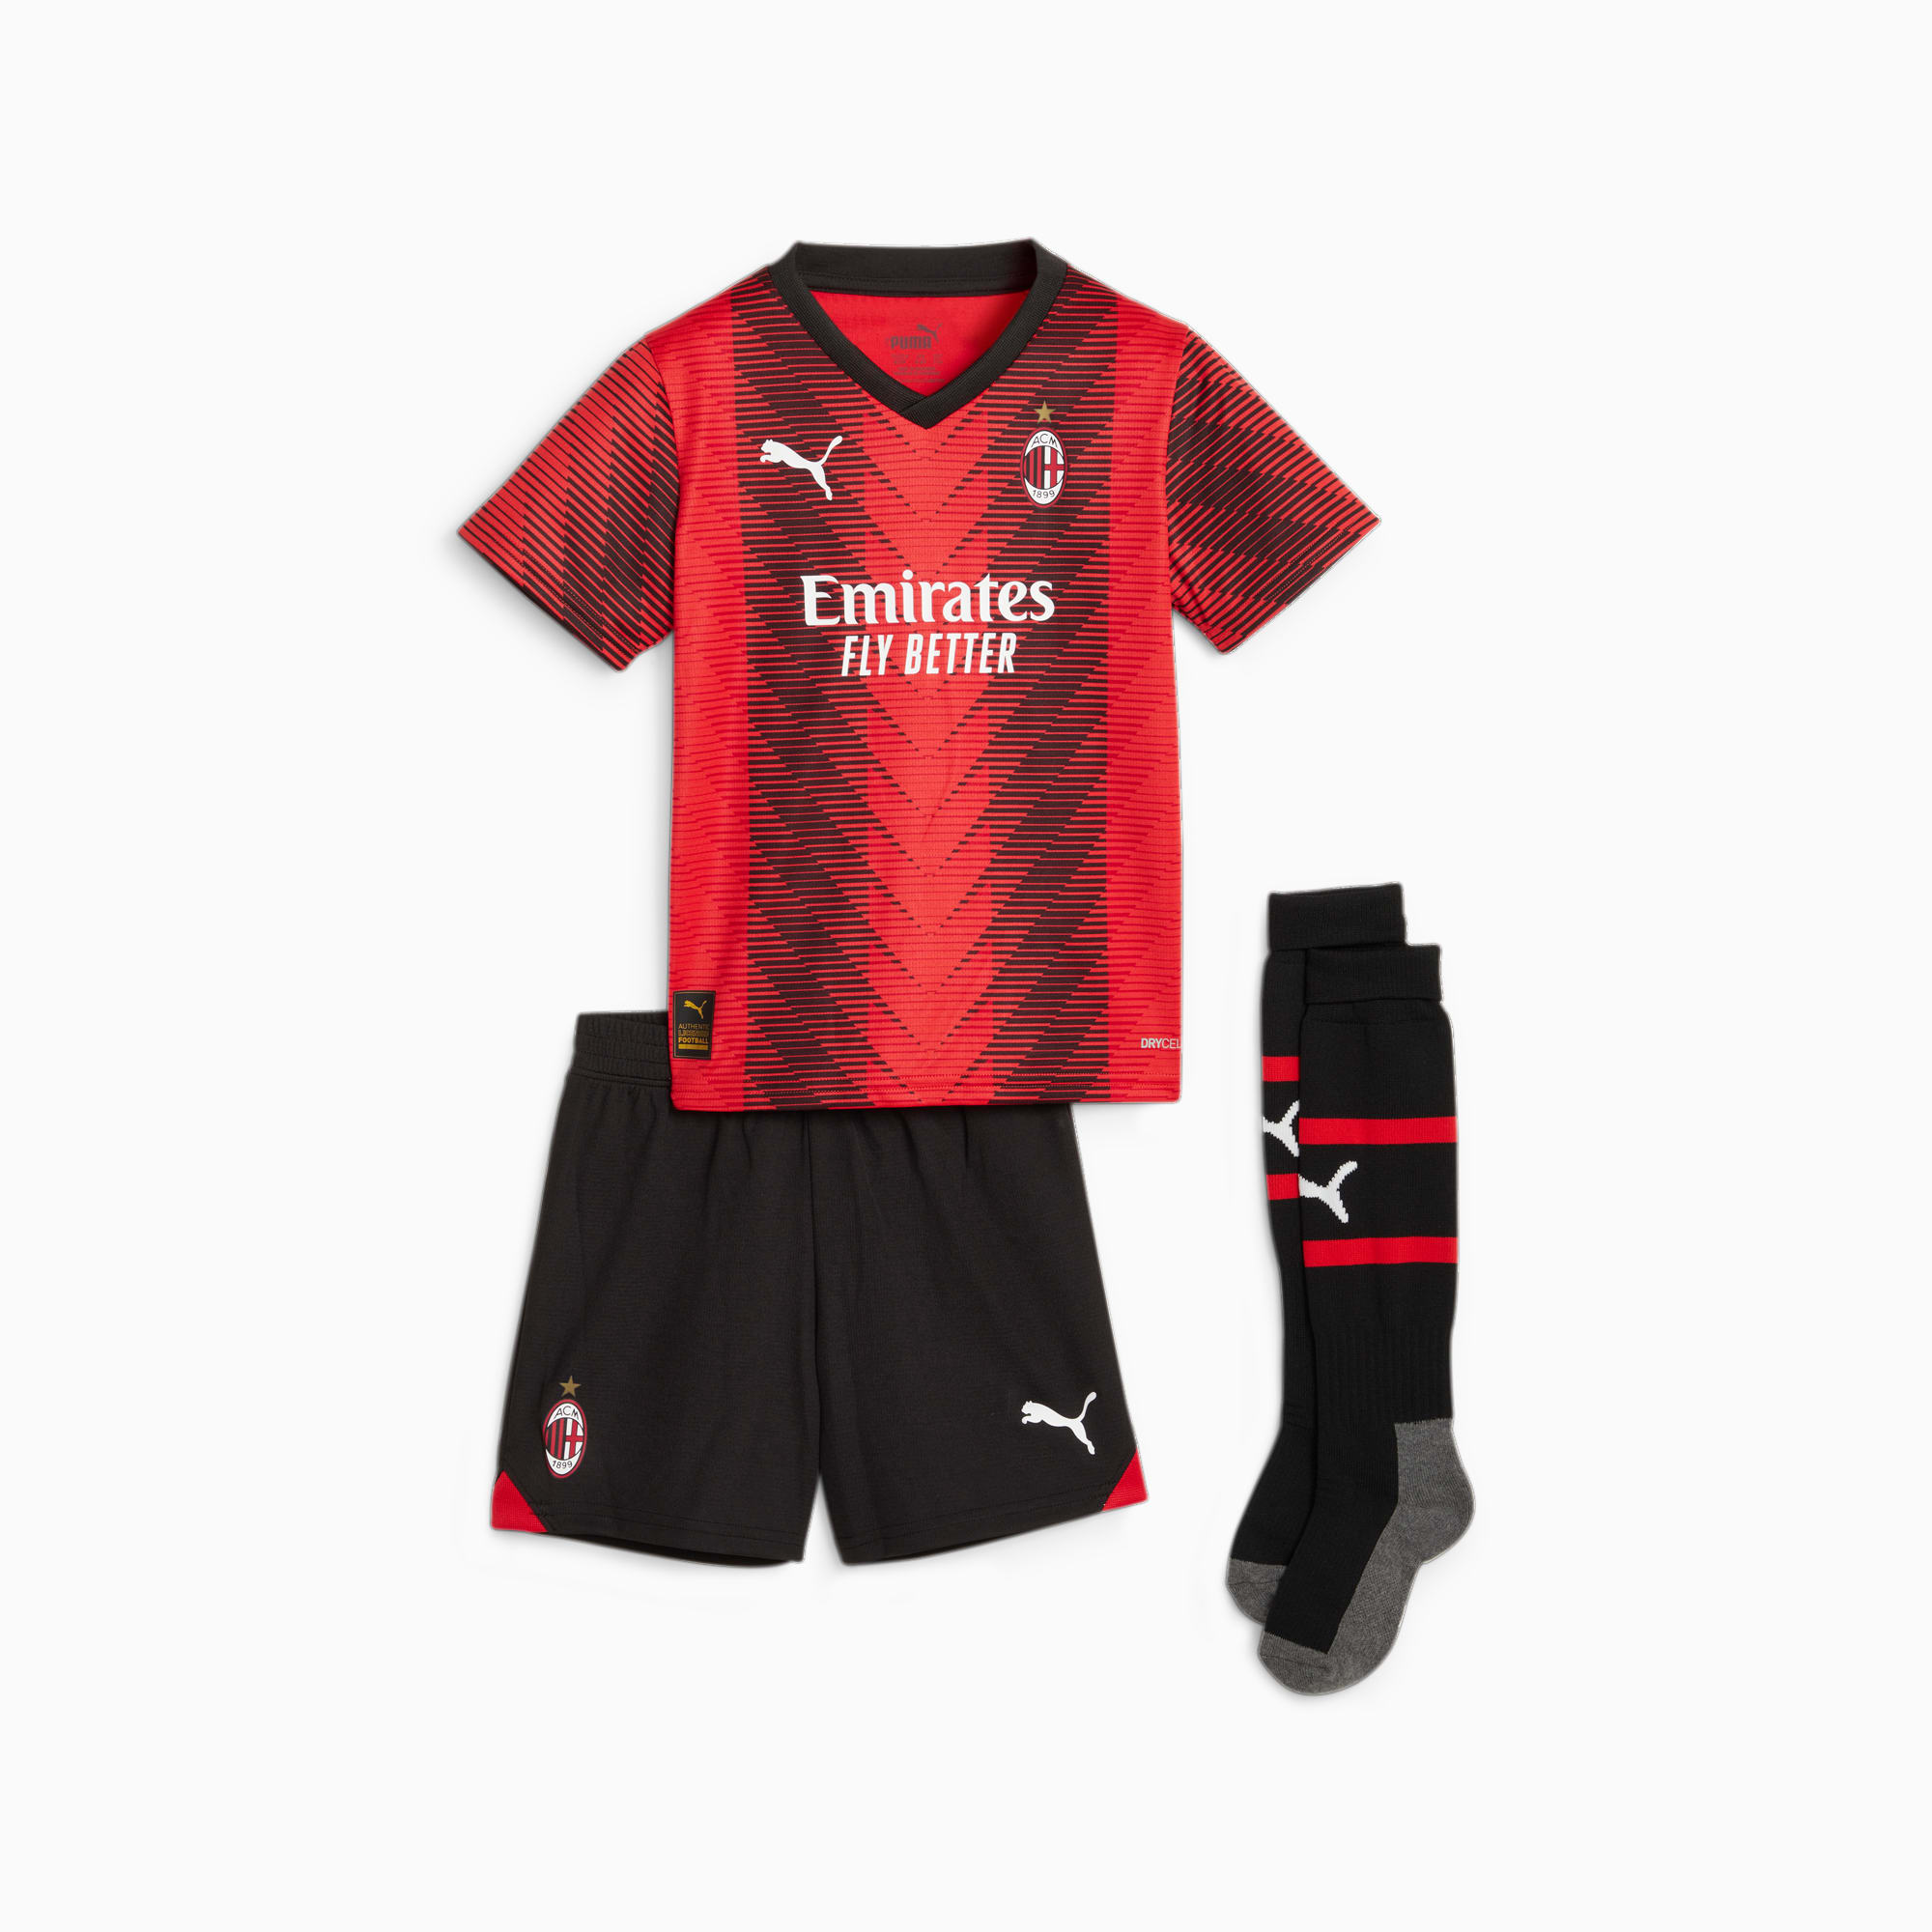 PUMA A.C. Milan 23/24 Home Mini Kit, For All Time Red/Black, Size 116, Clothing